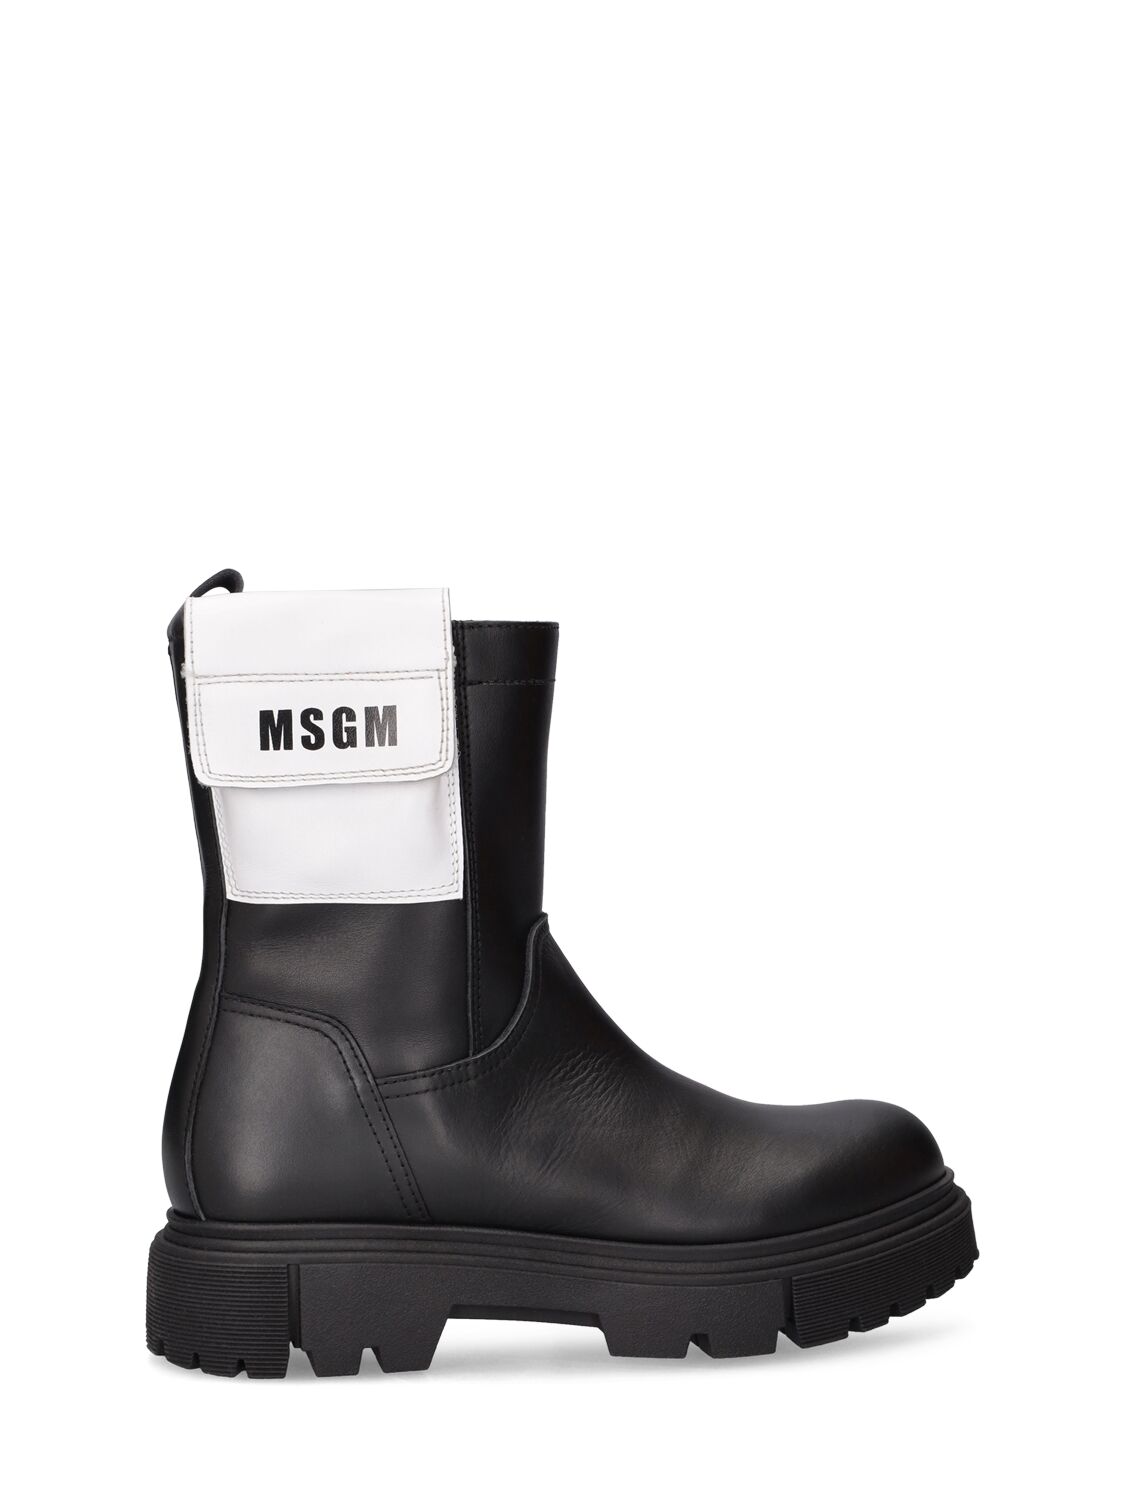 Leather High Boots W/logo Pocket – KIDS-GIRLS > SHOES > BOOTS